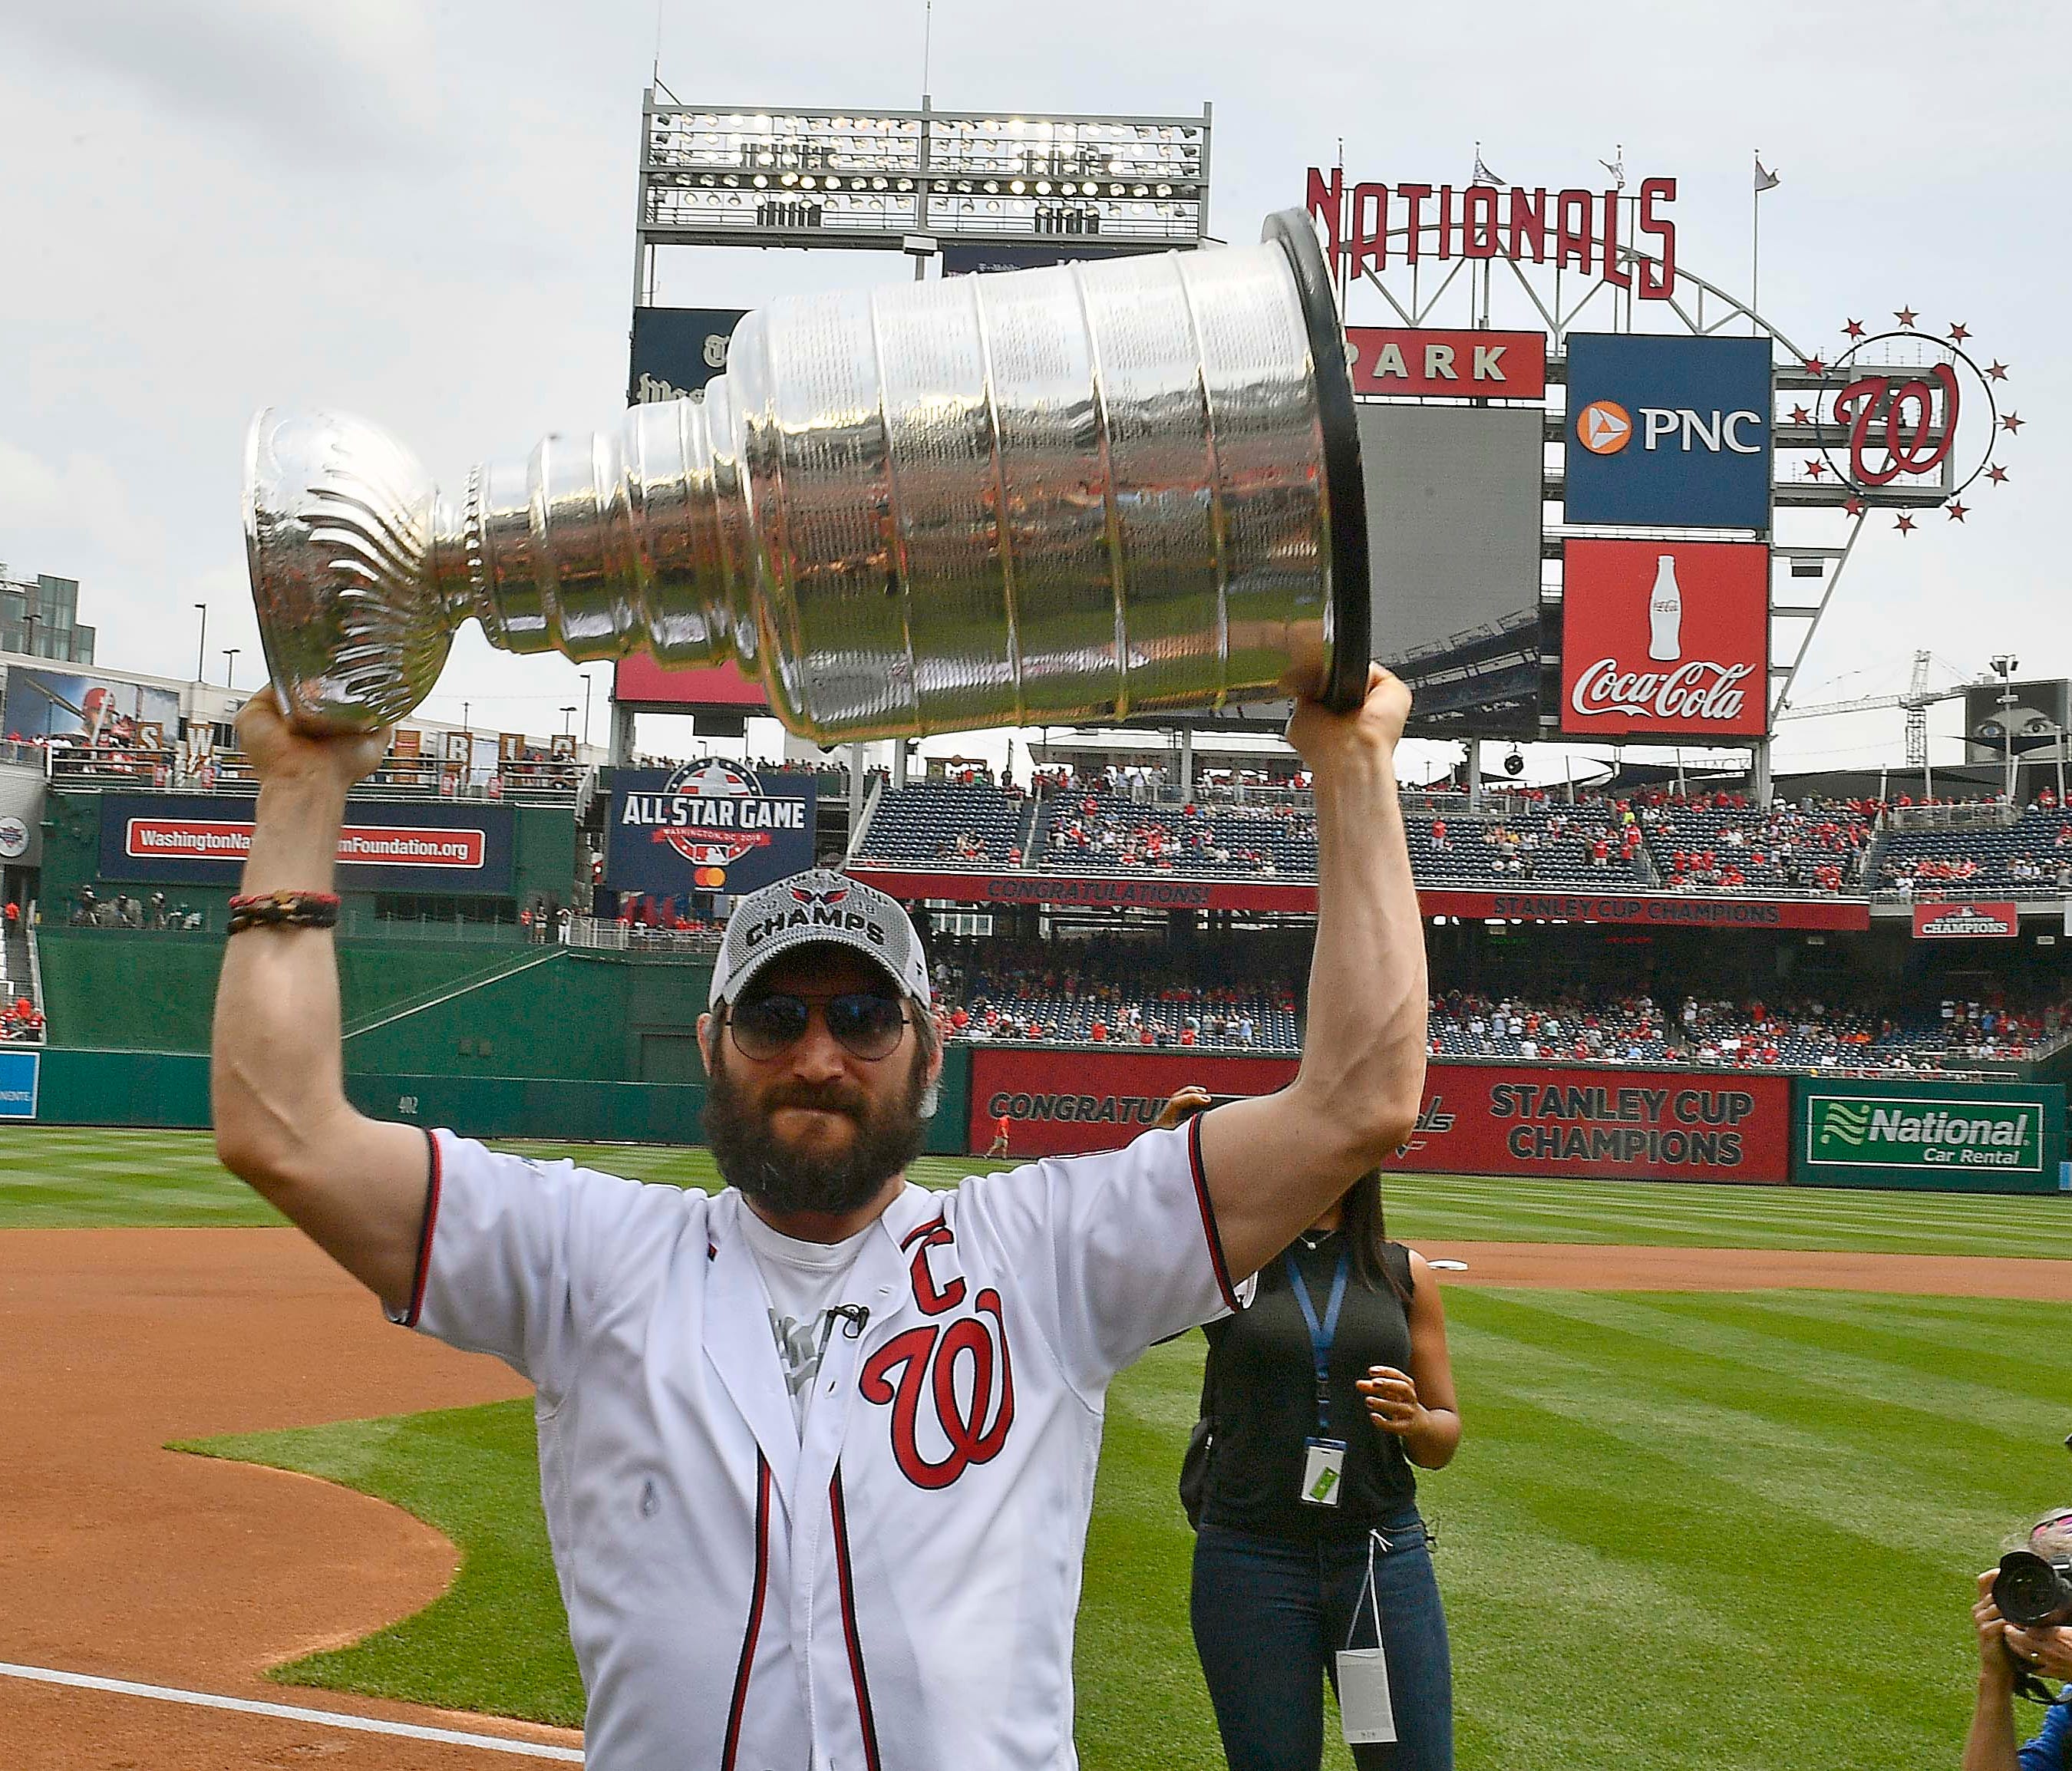 Alex Ovechkin hoists the Stanley Cup at the Washington Nationals game on Saturday.